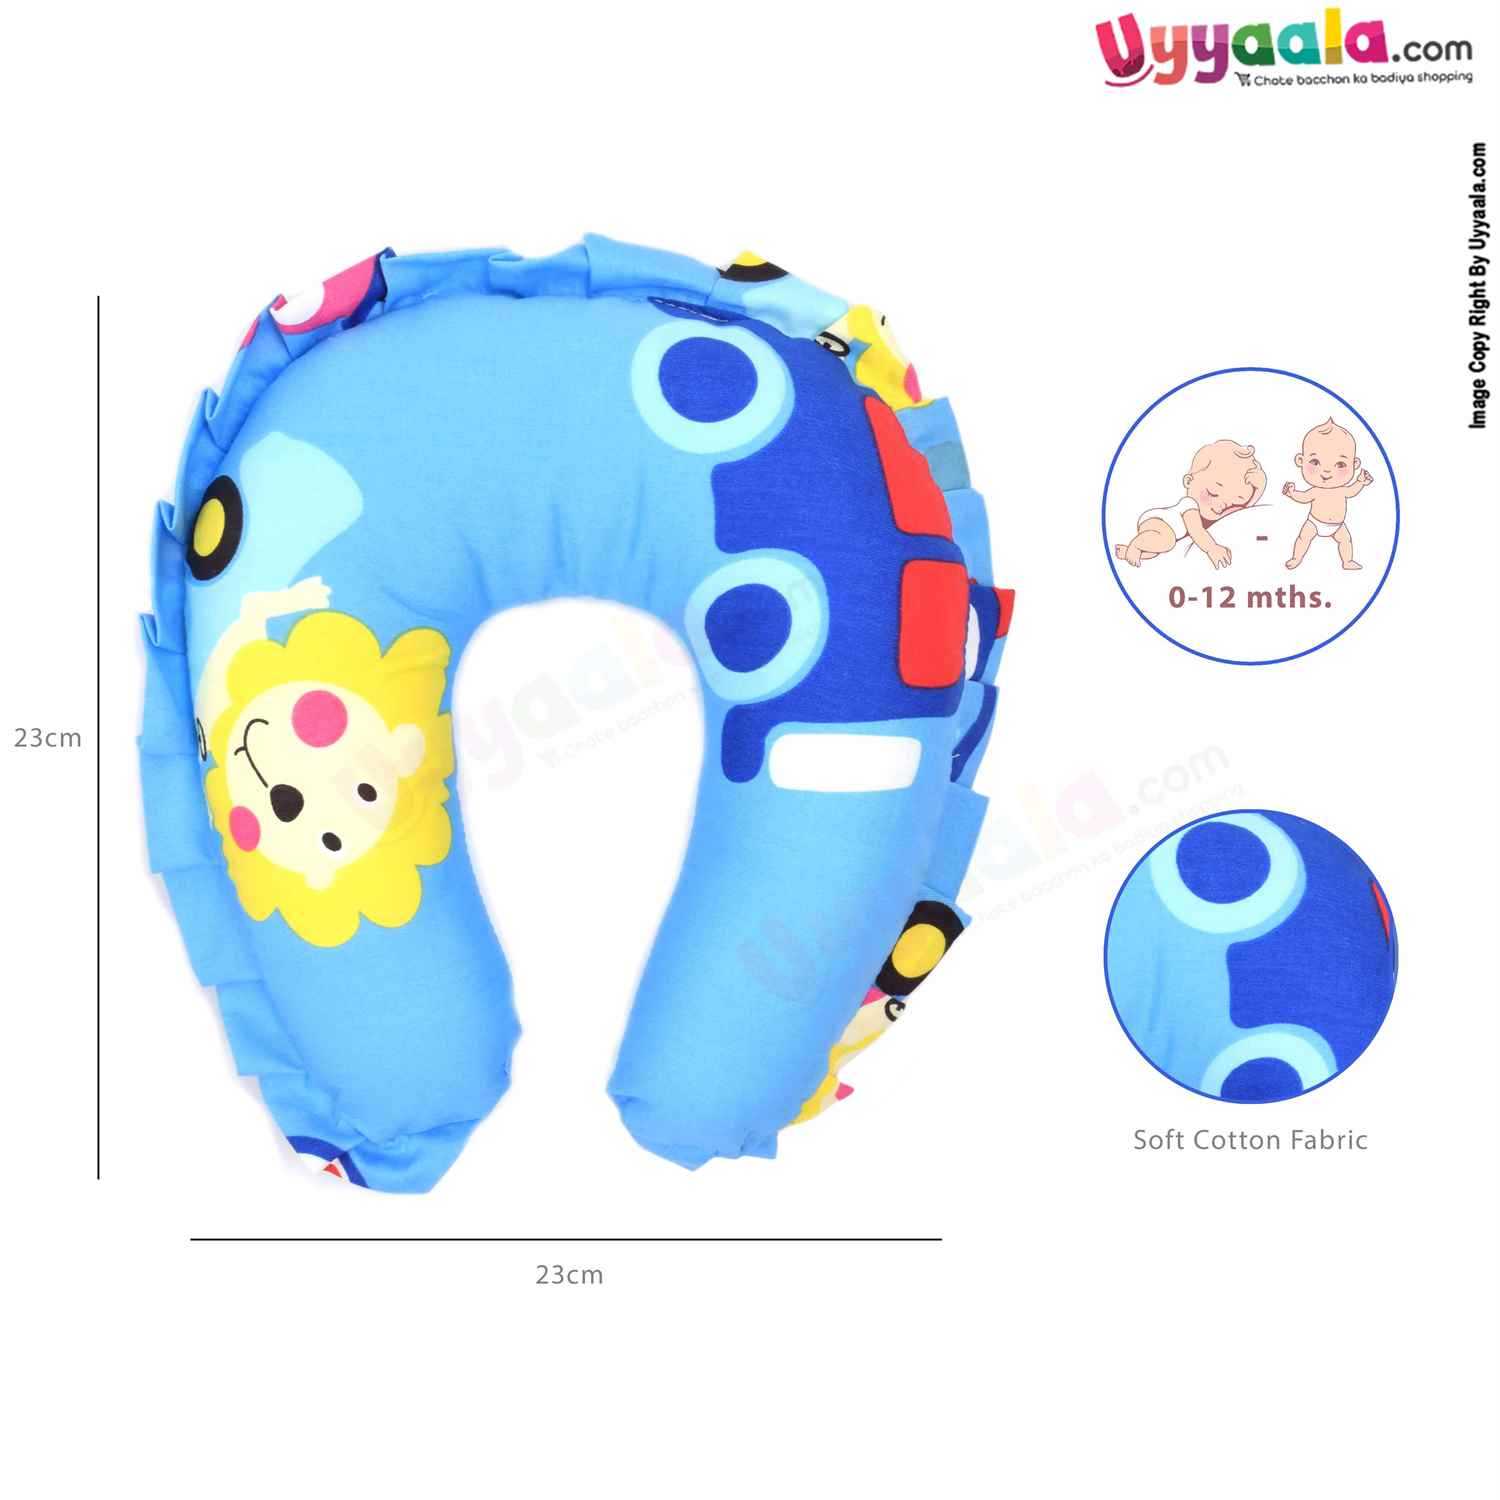 Neck Pillow for babies